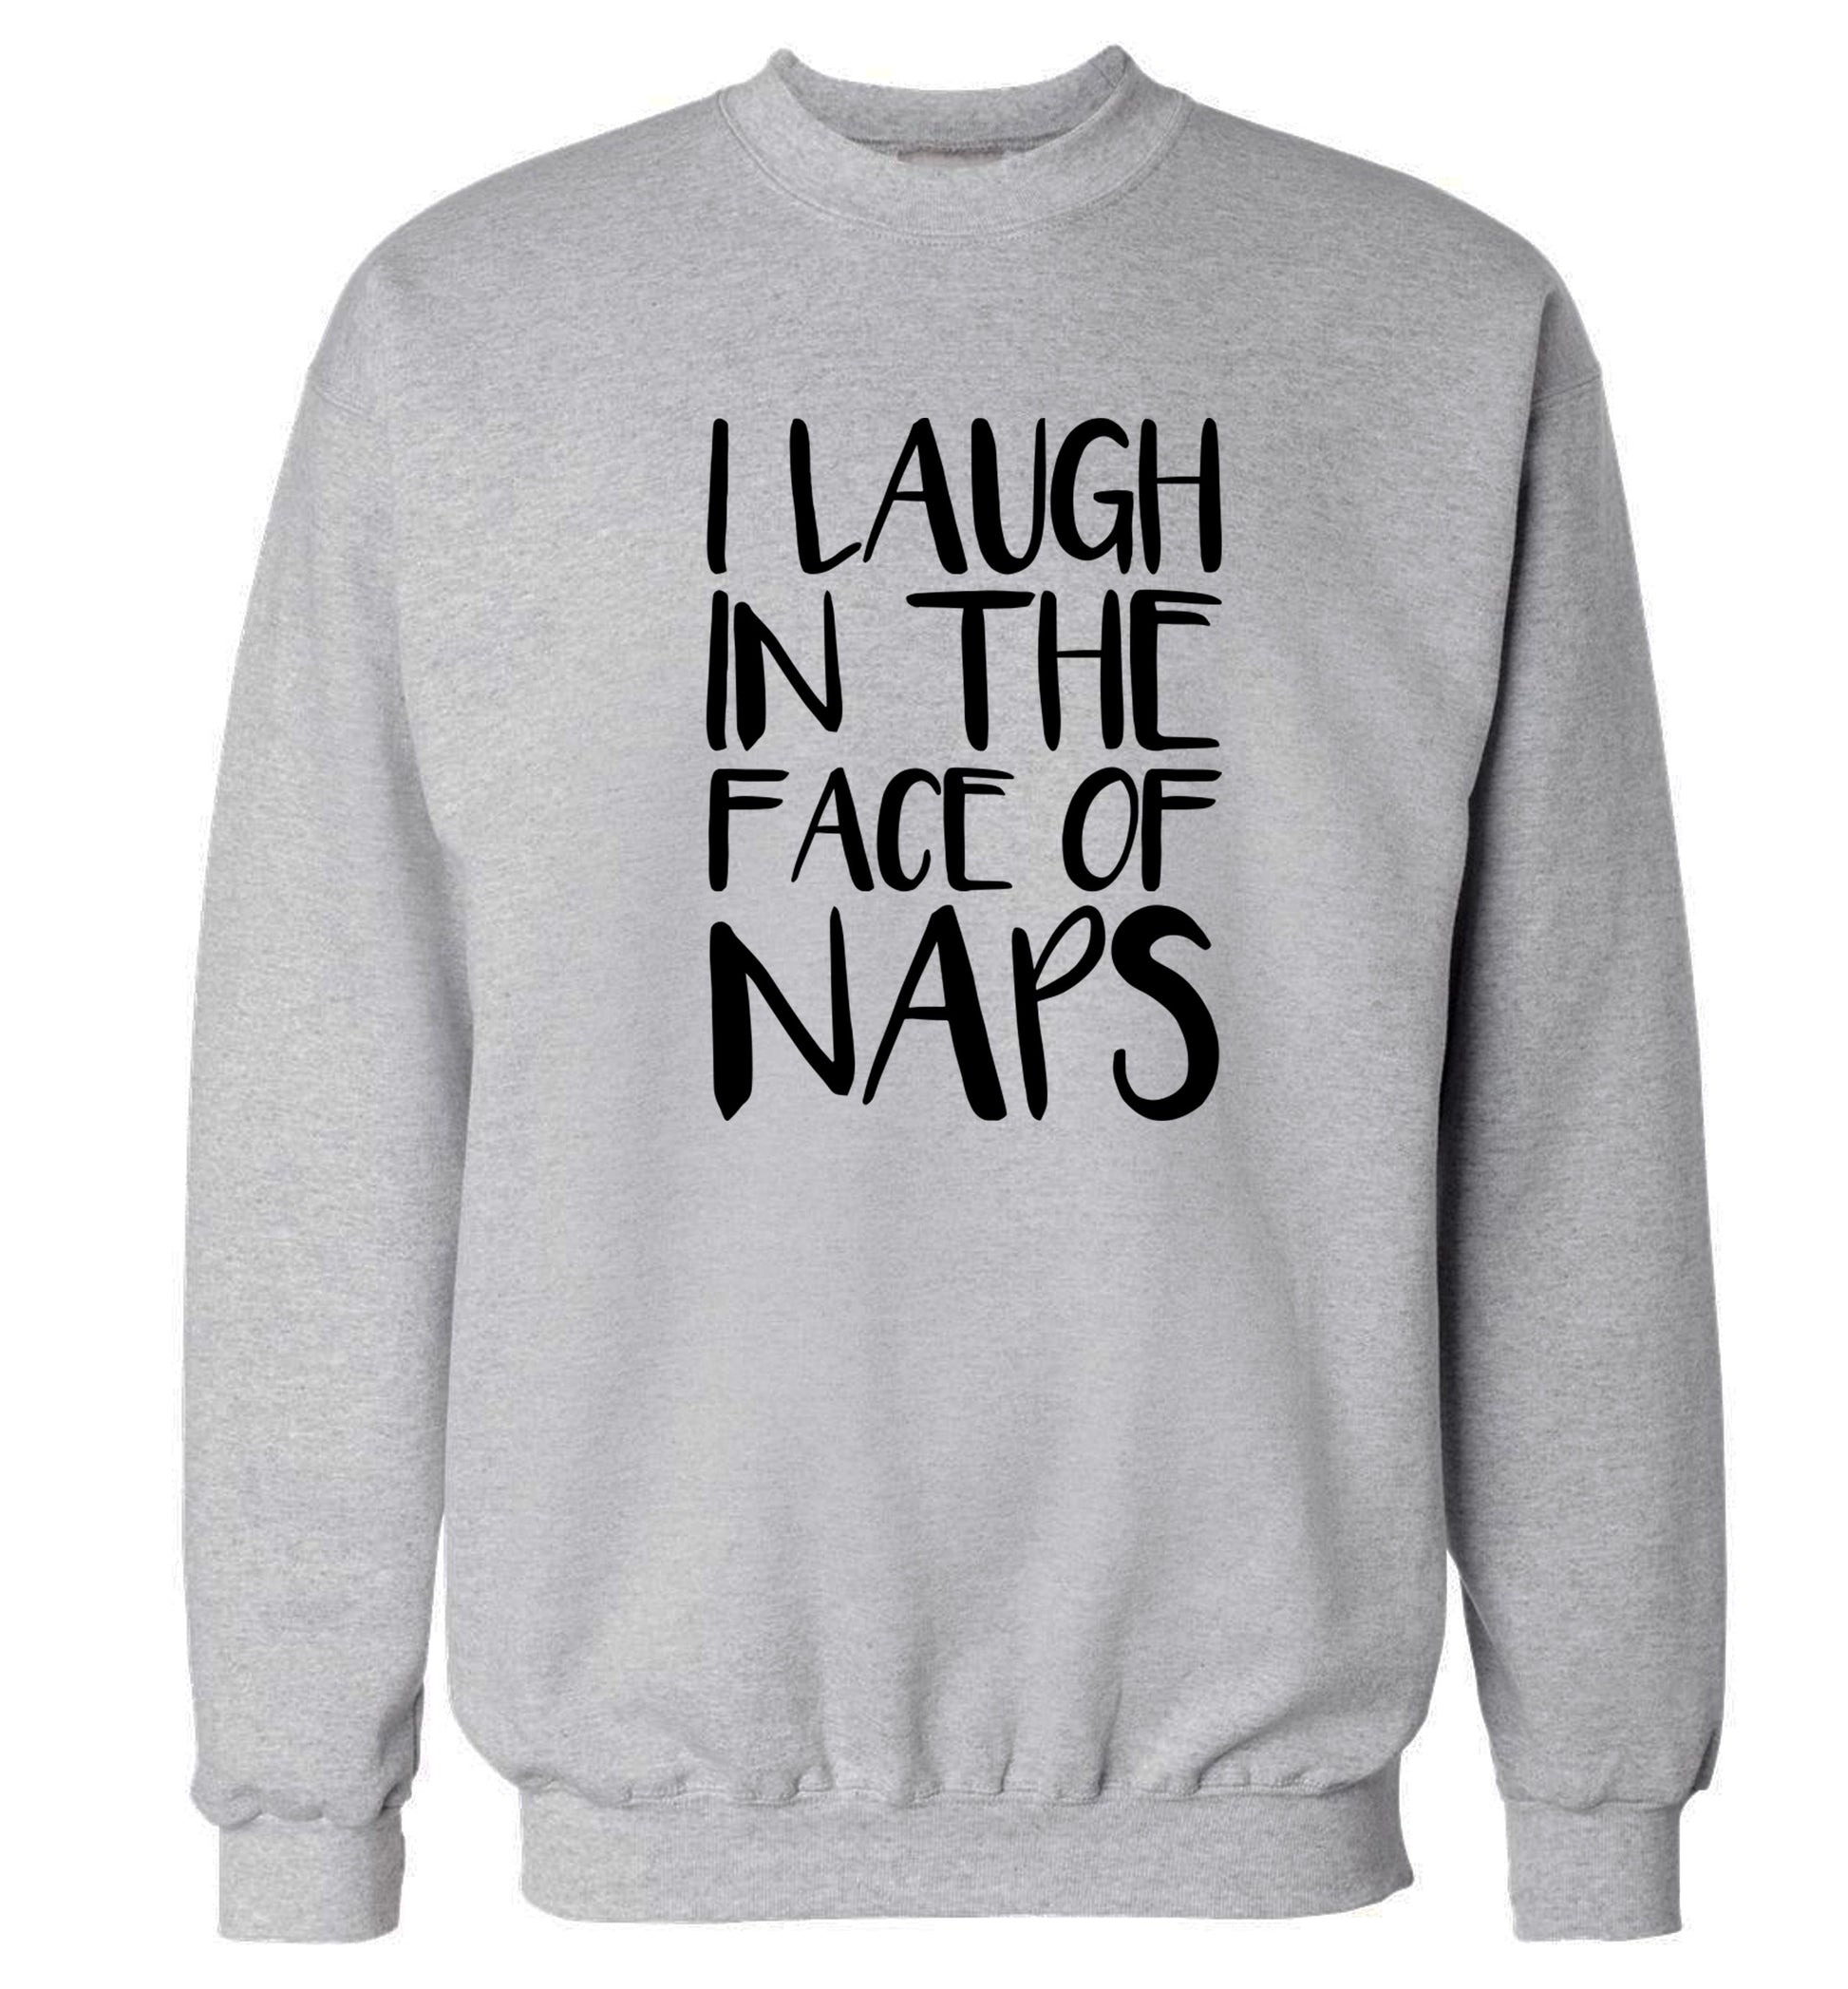 I laugh in the face of naps Adult's unisex grey Sweater 2XL